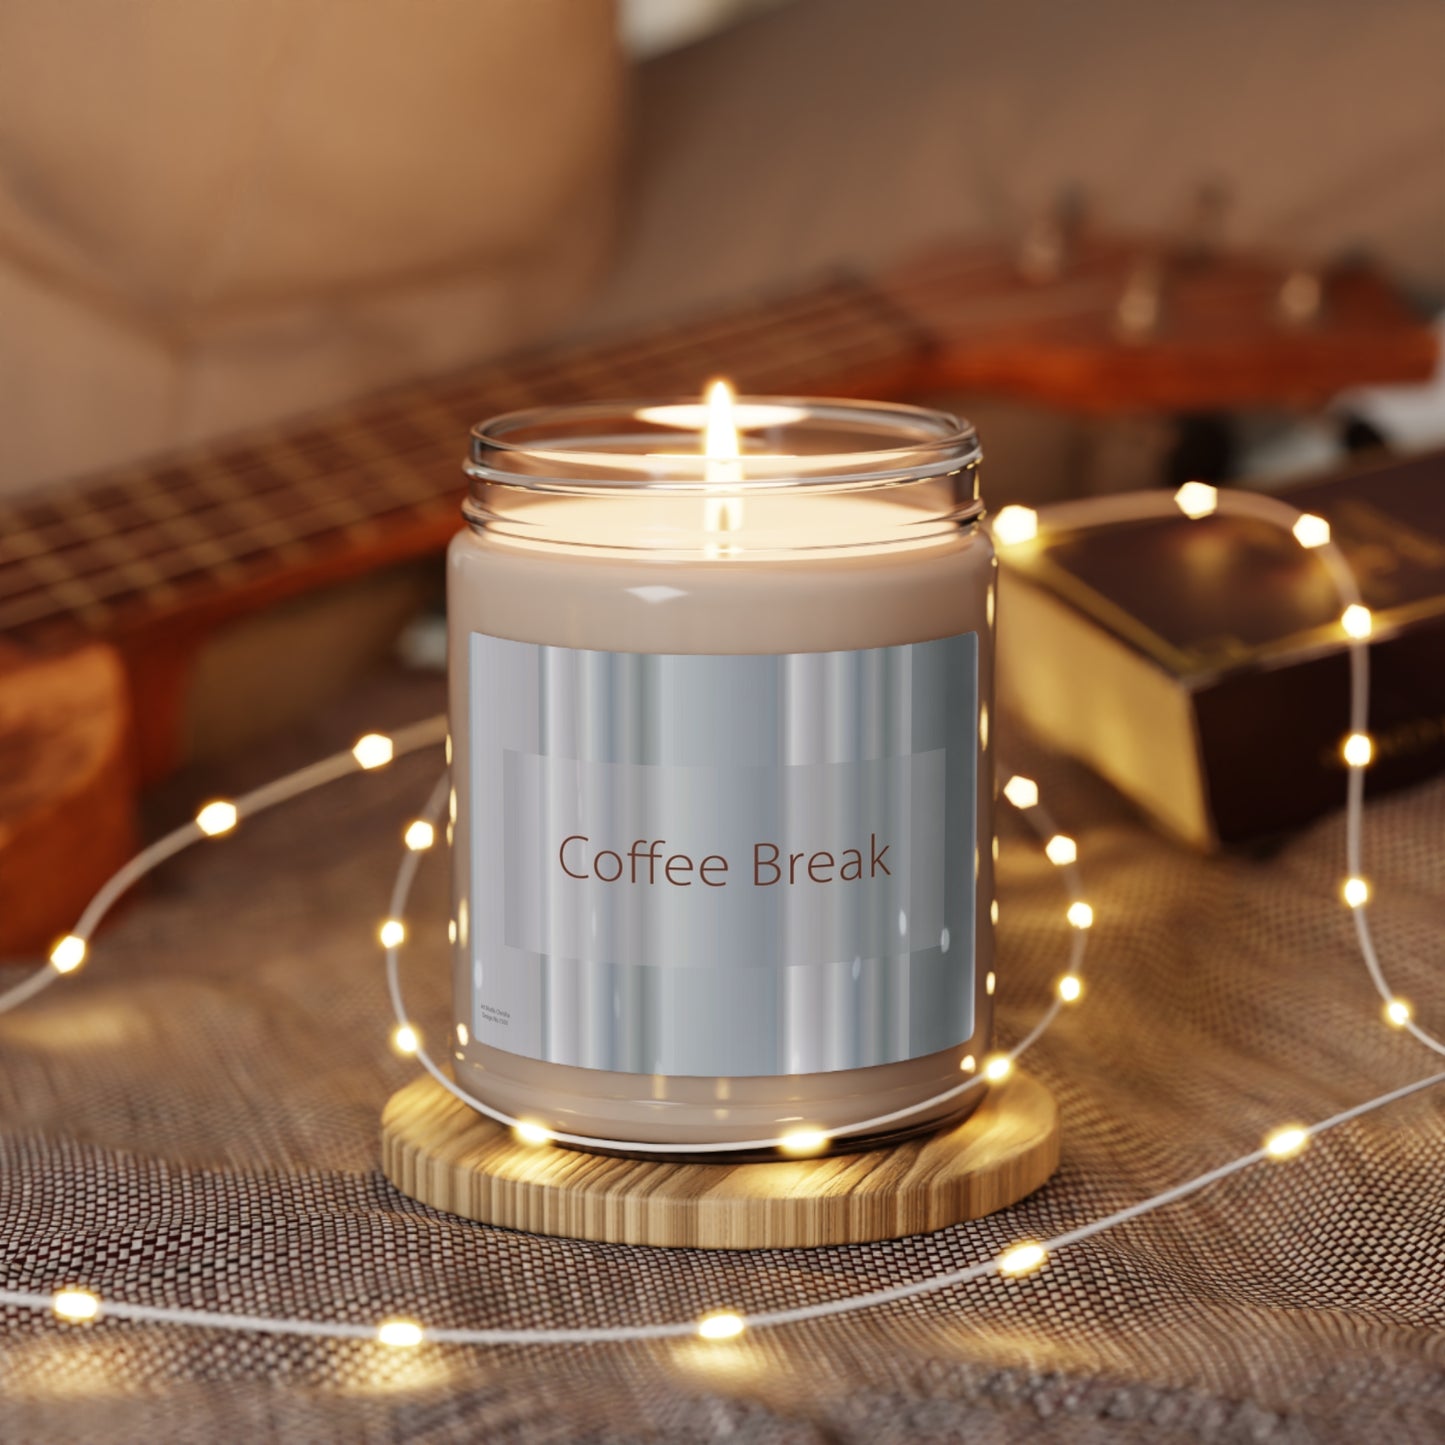 Scented Soy Candle, 9oz Coffee Break - Design No.1500